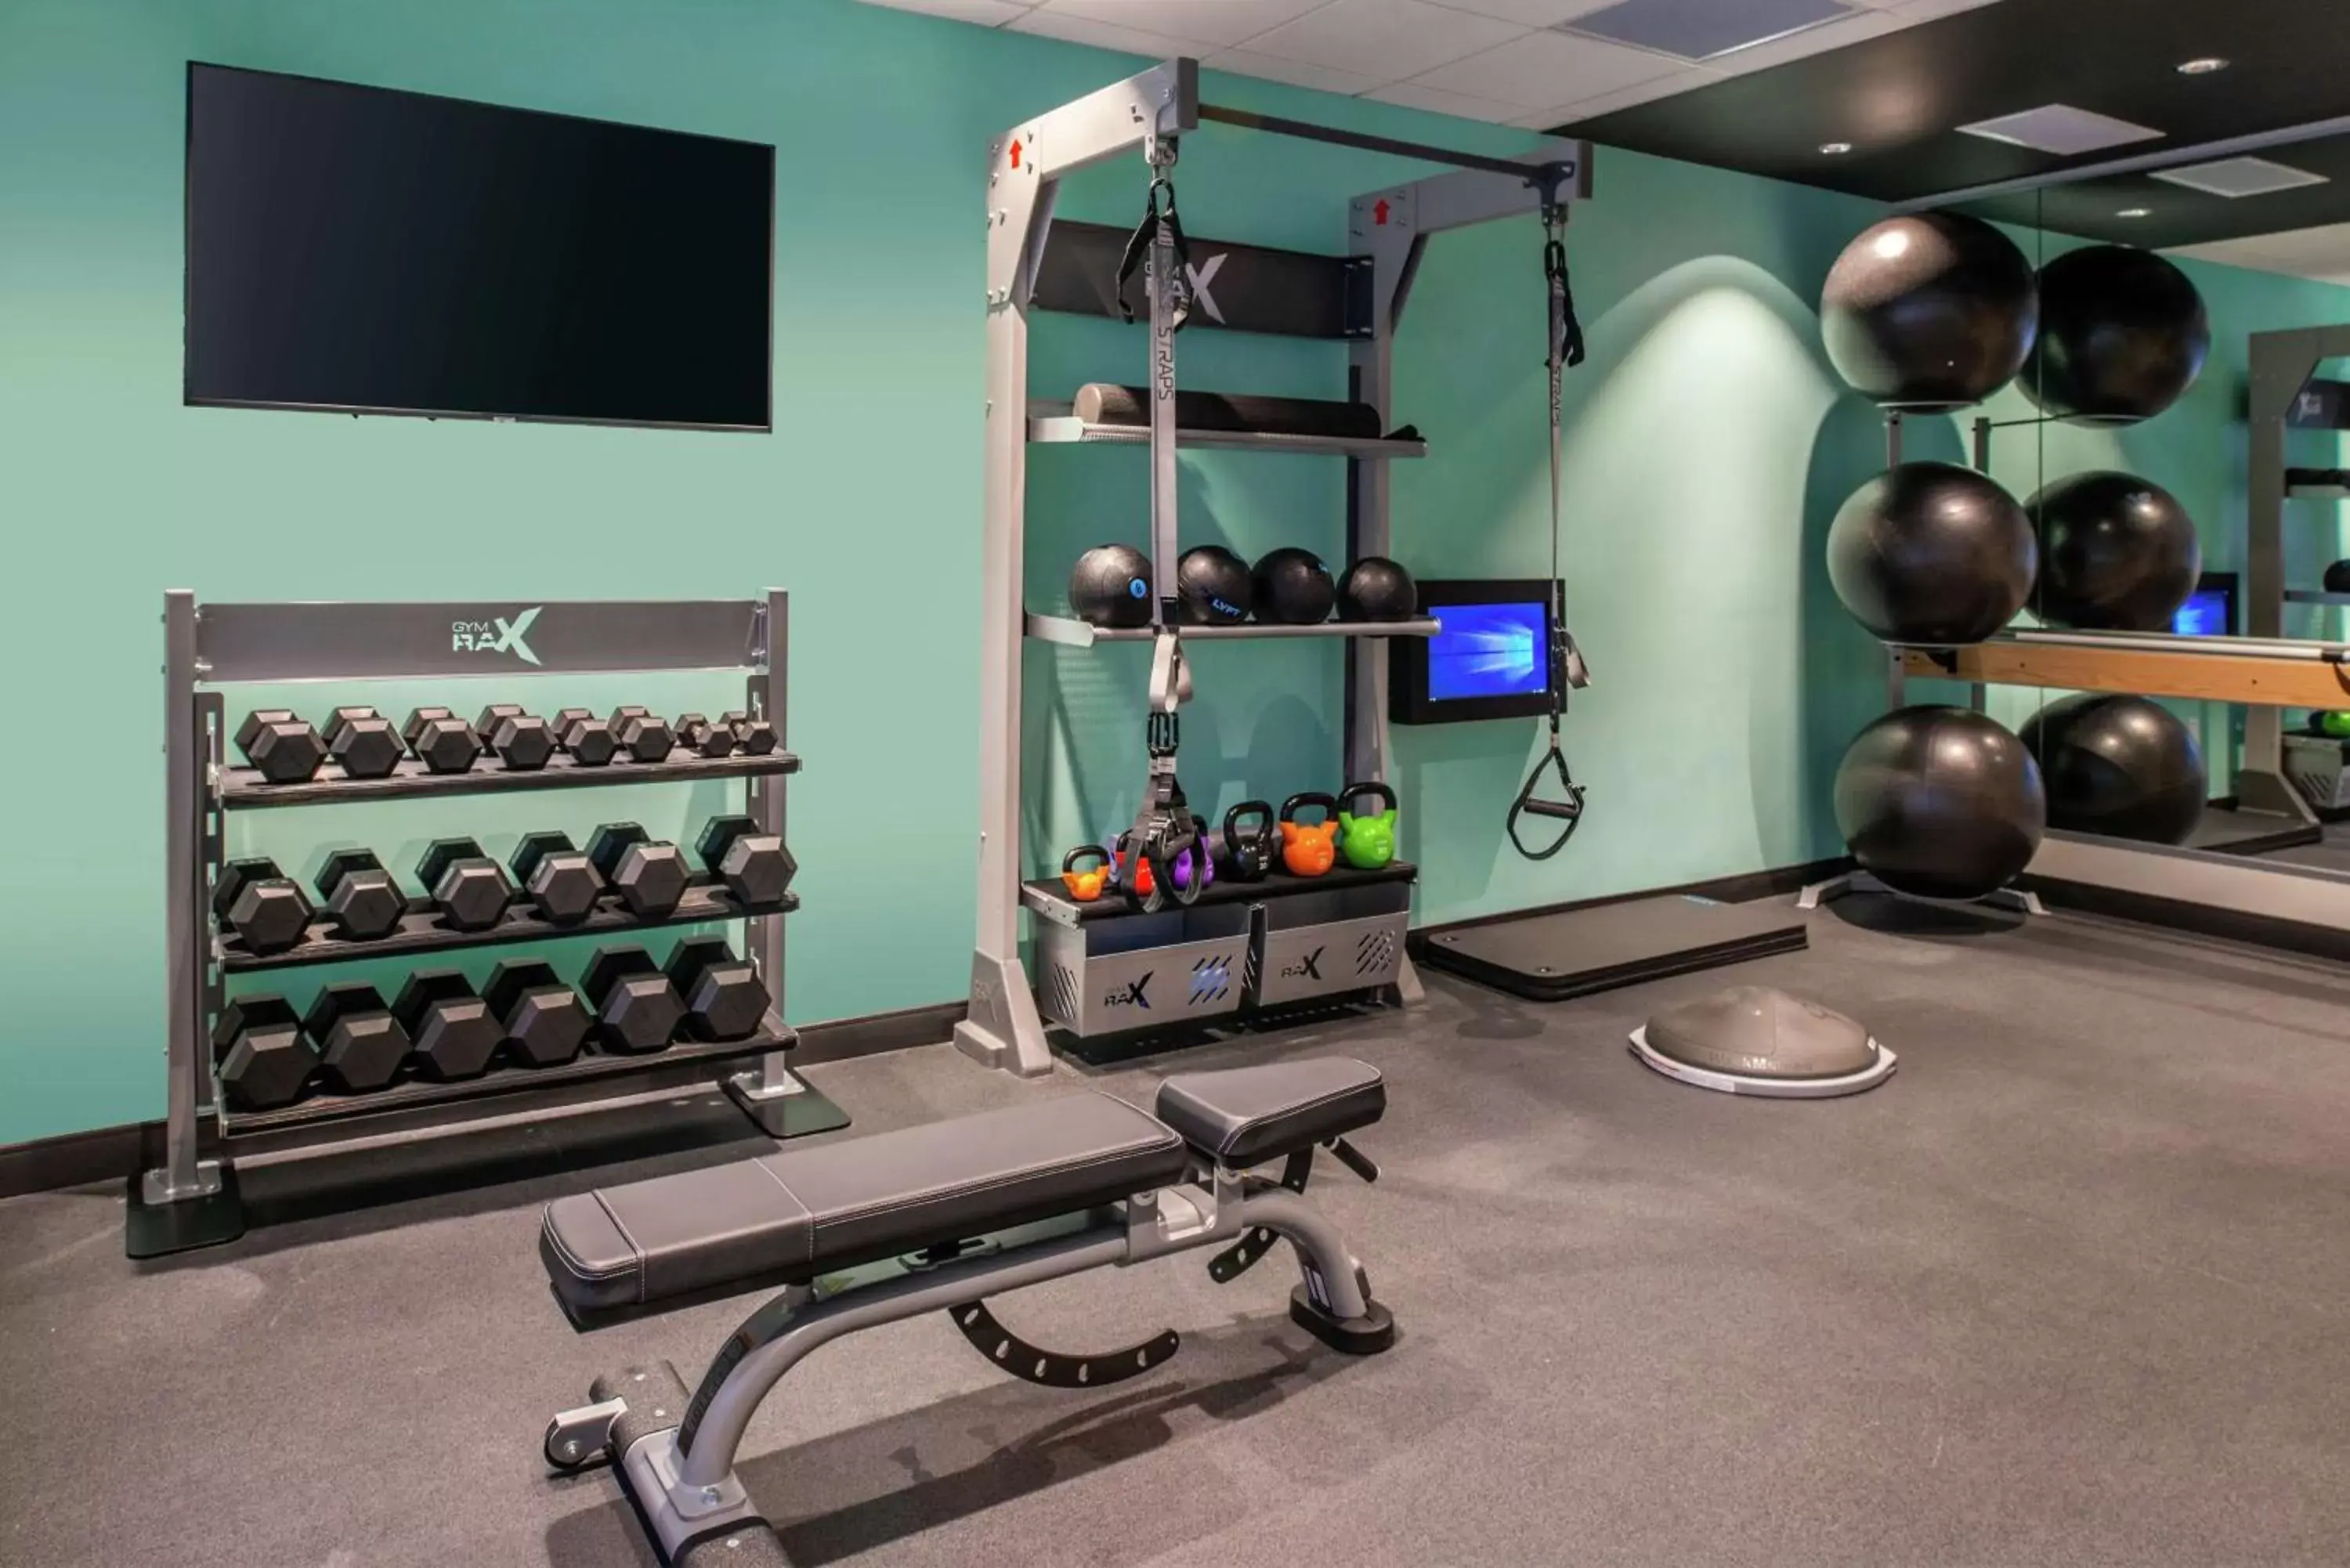 Fitness centre/facilities, Fitness Center/Facilities in Tru By Hilton Elkhart, In